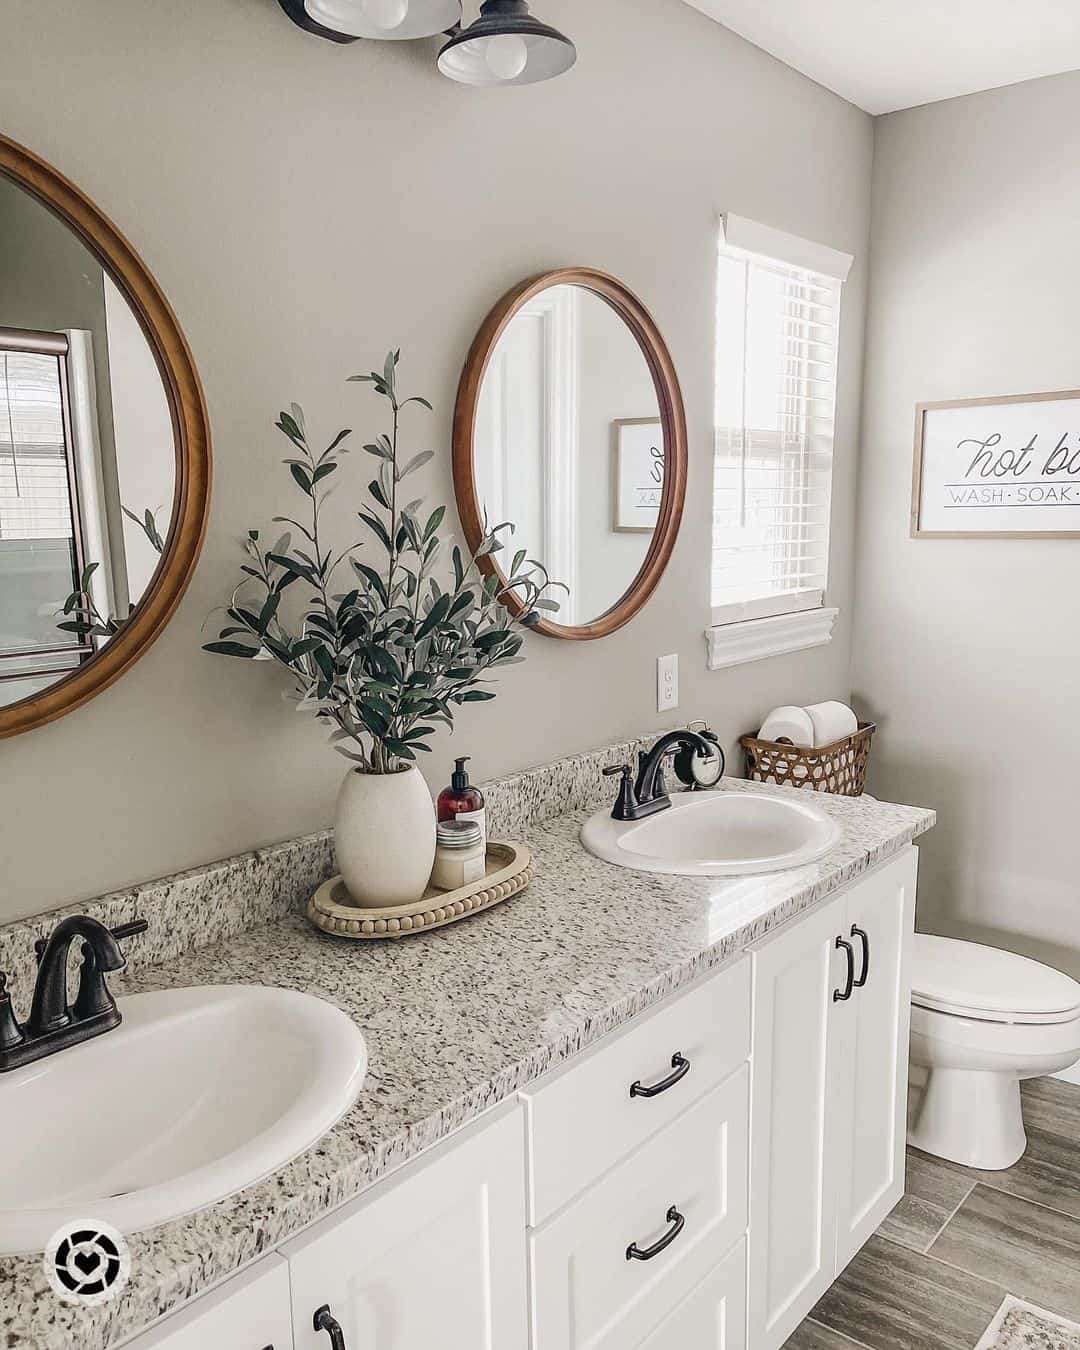 Fun and Practical Styles of Bathroom Counter Décor